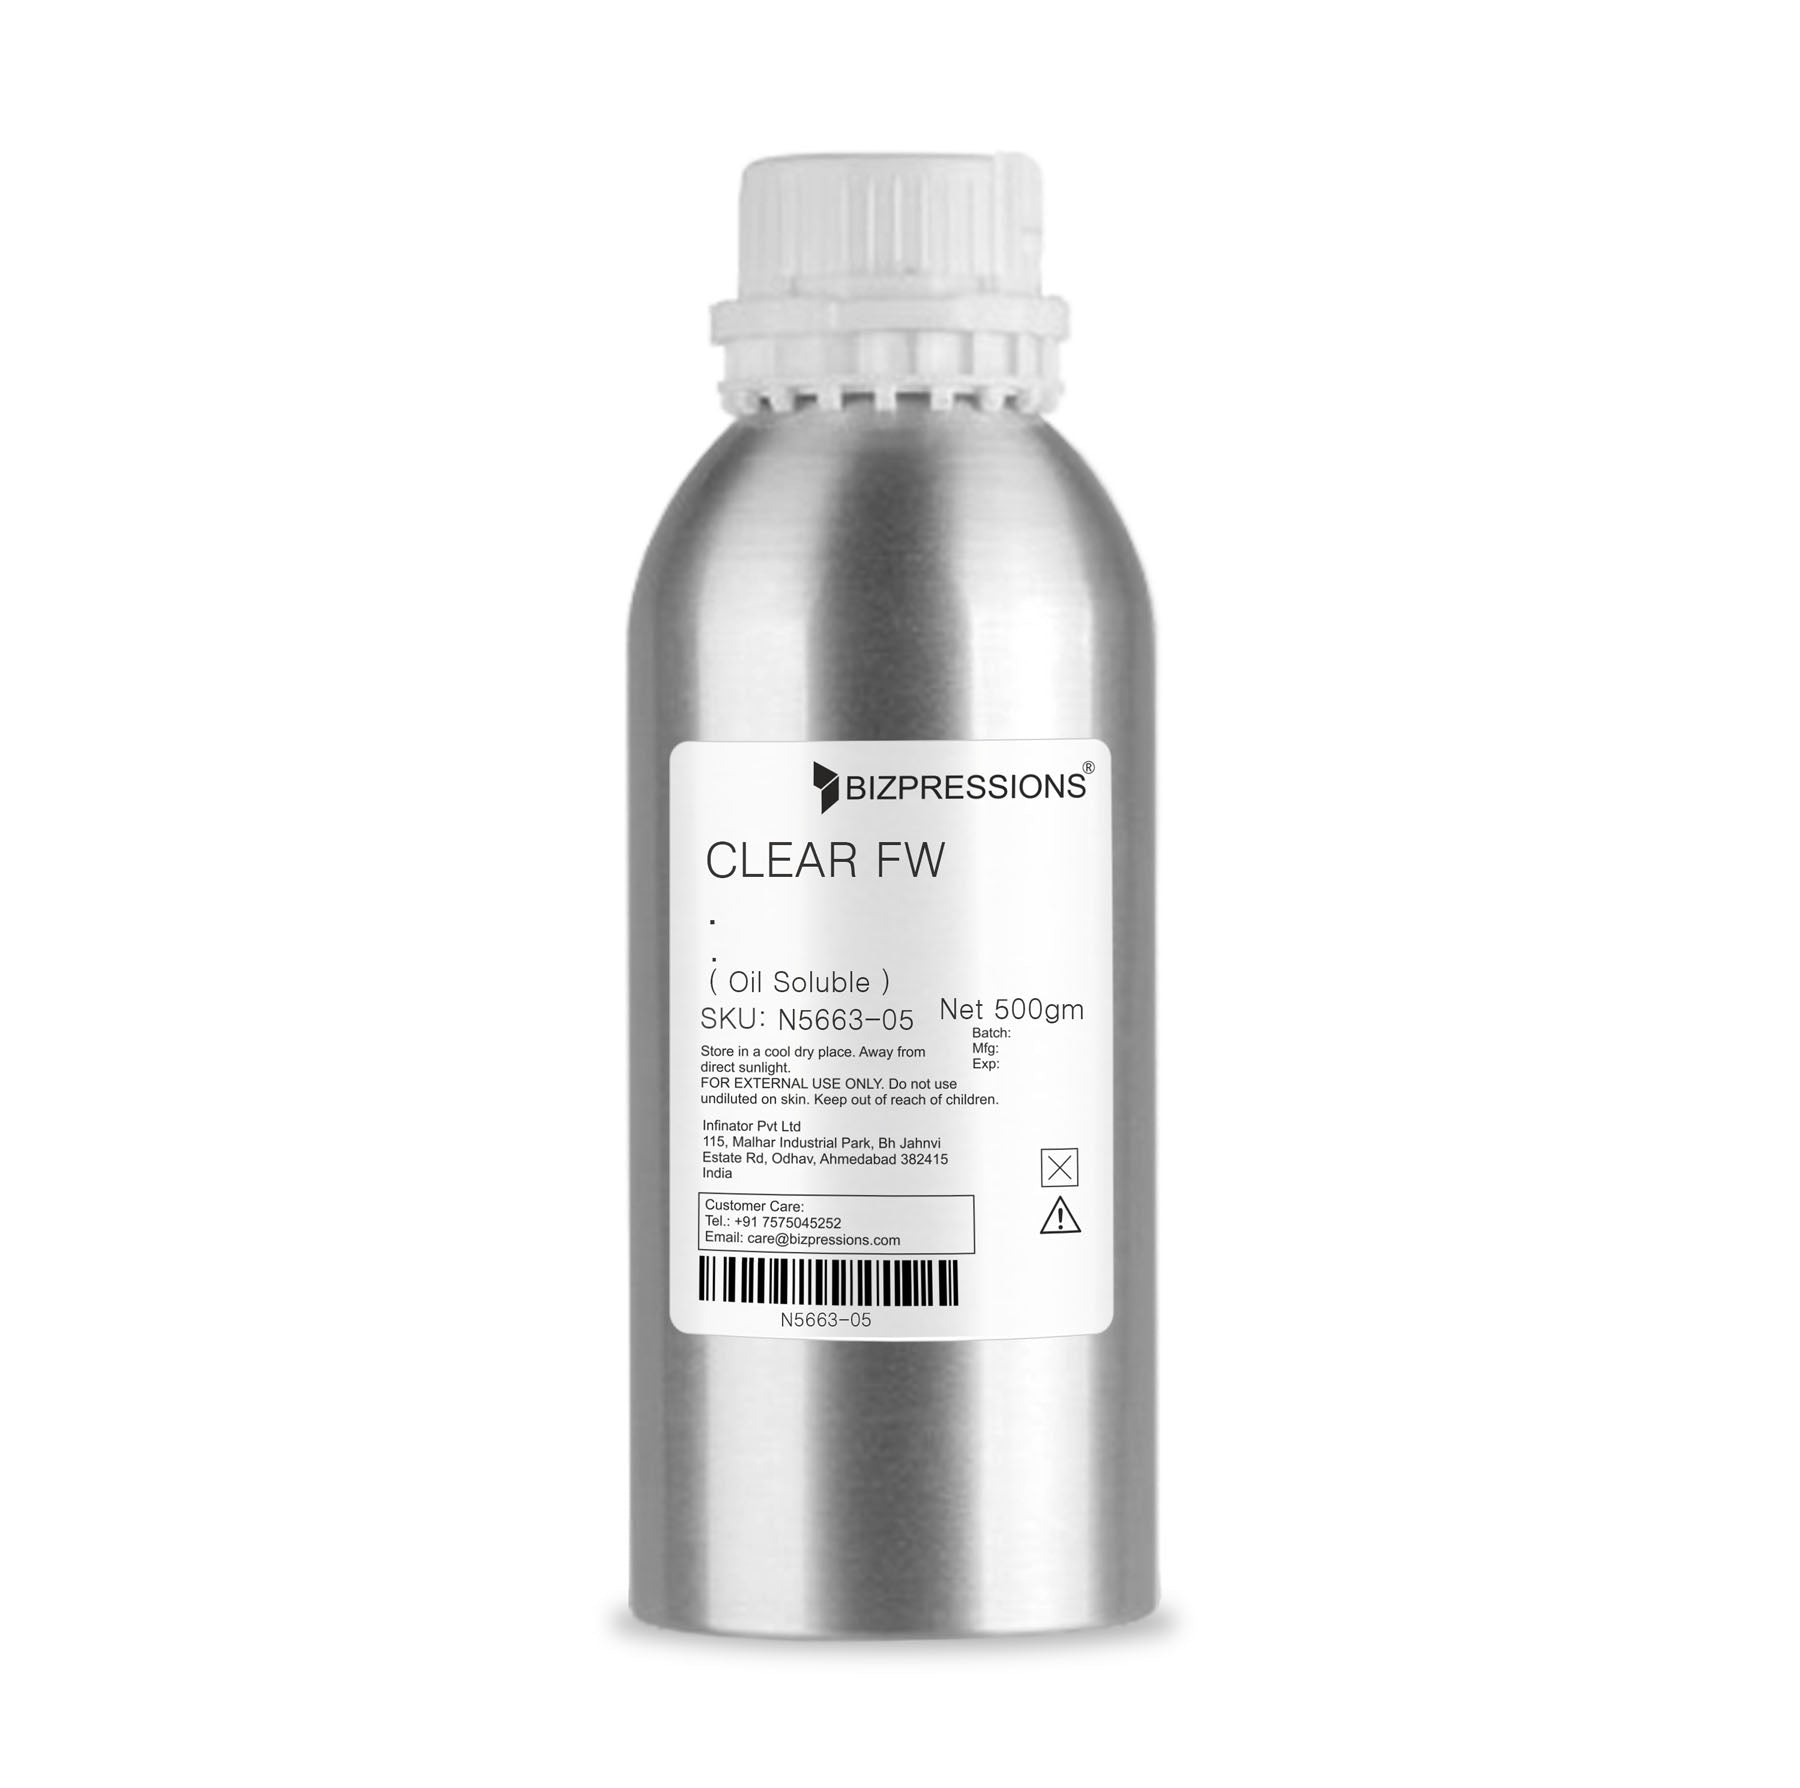 CLEAR FW - Fragrance ( Oil Soluble ) - 500 gm